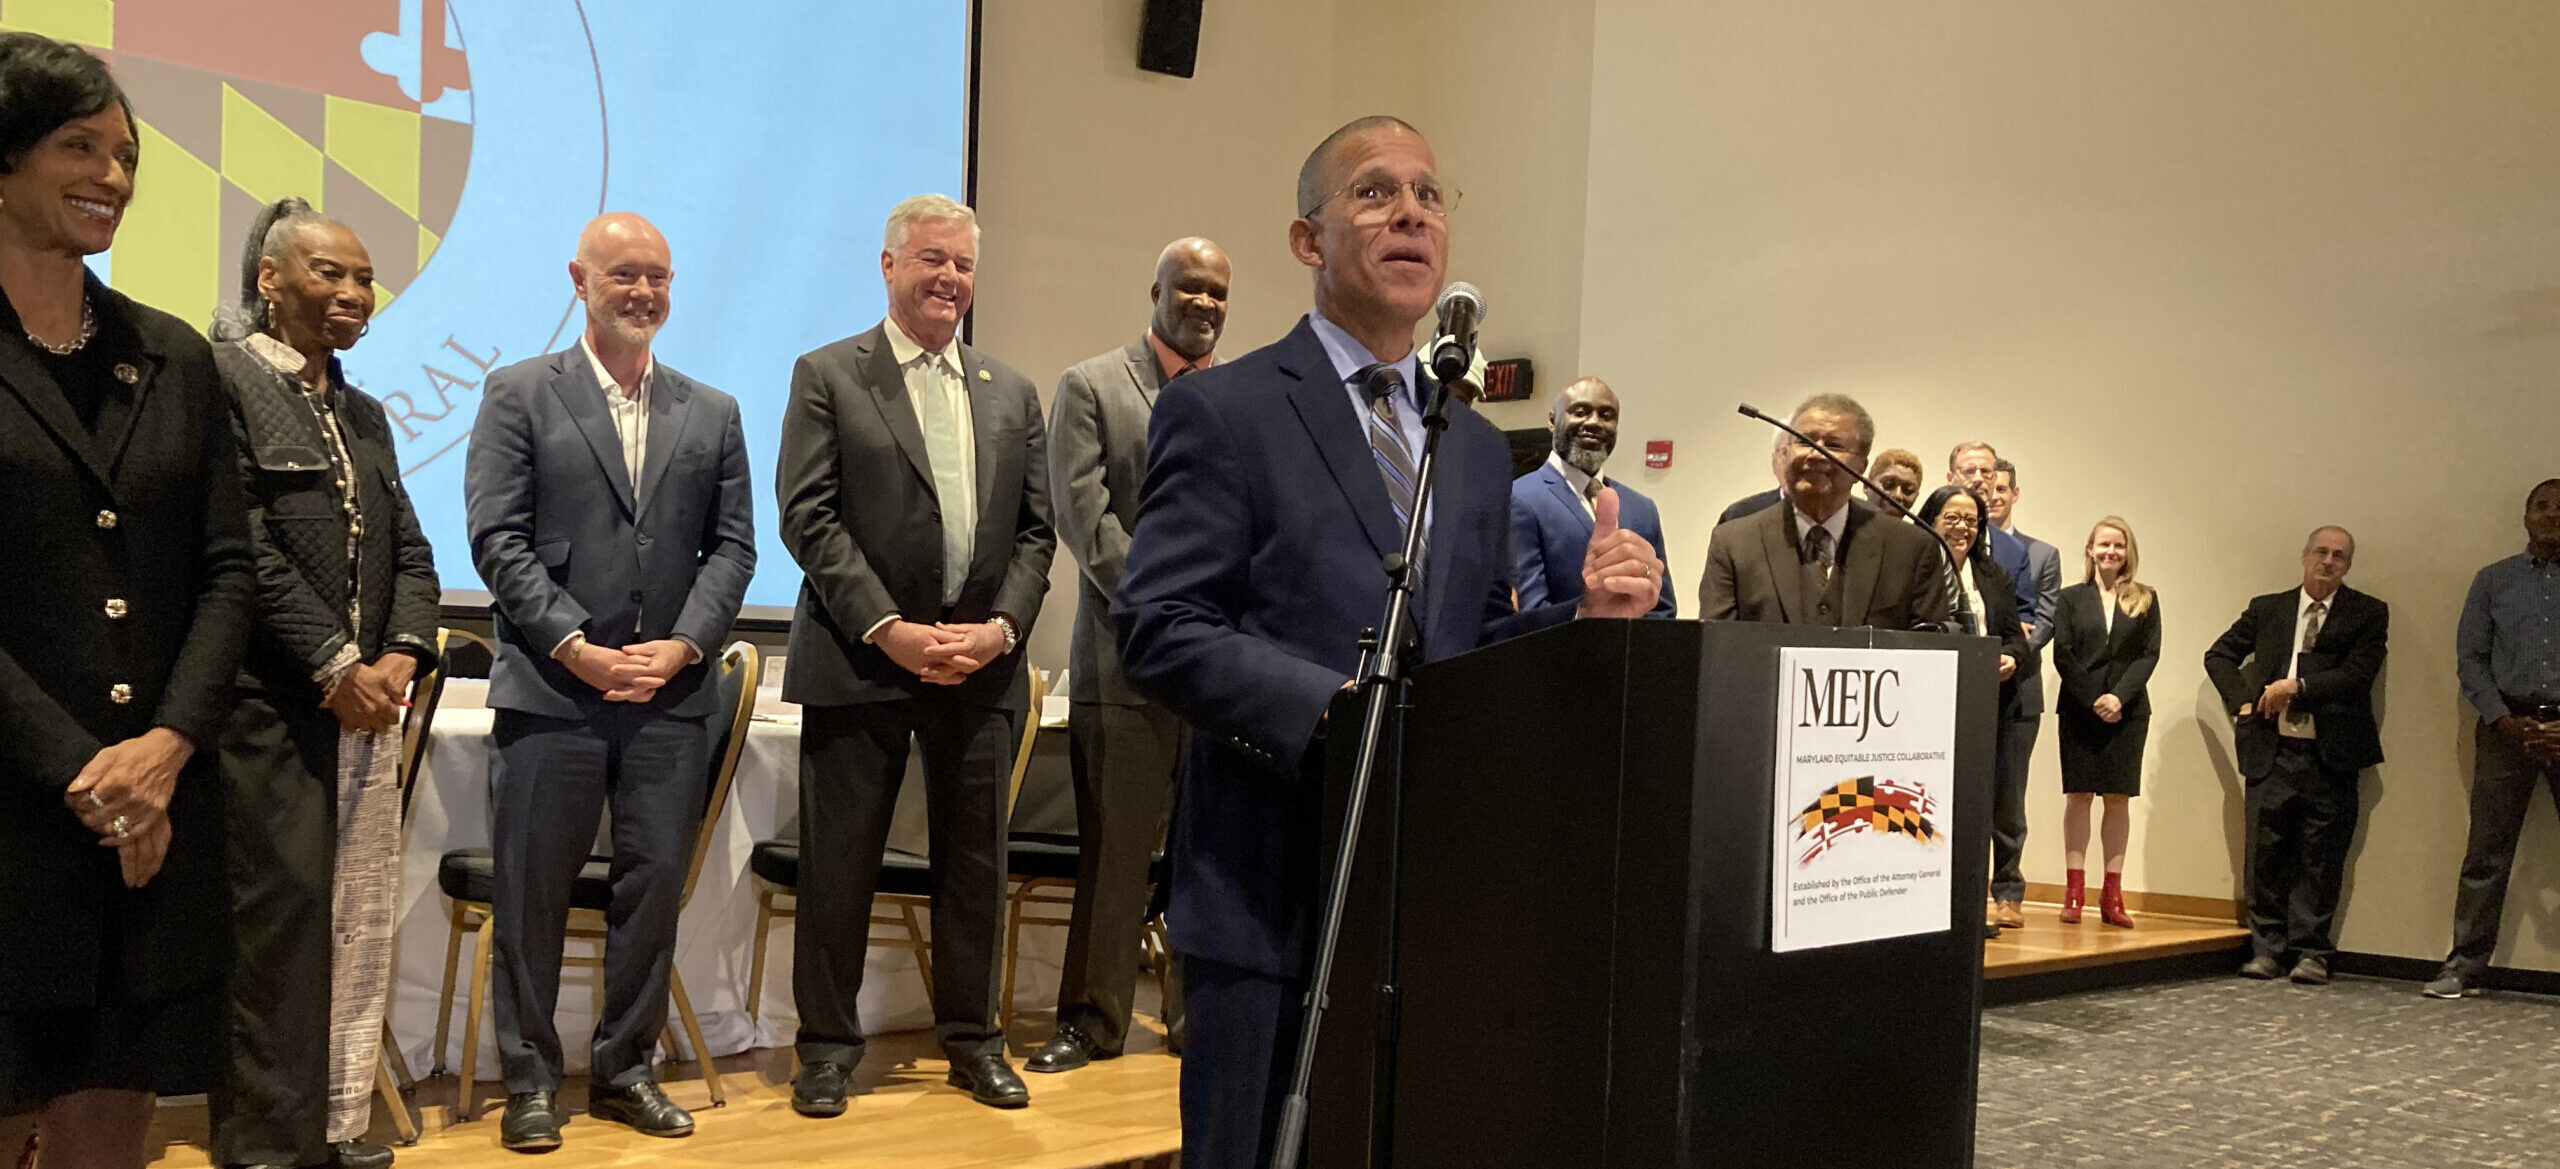 Maryland Attorney General Anthony Brown stands at a podium speaking with a group of lawmakers, agency heads and community organization leaders behind him.